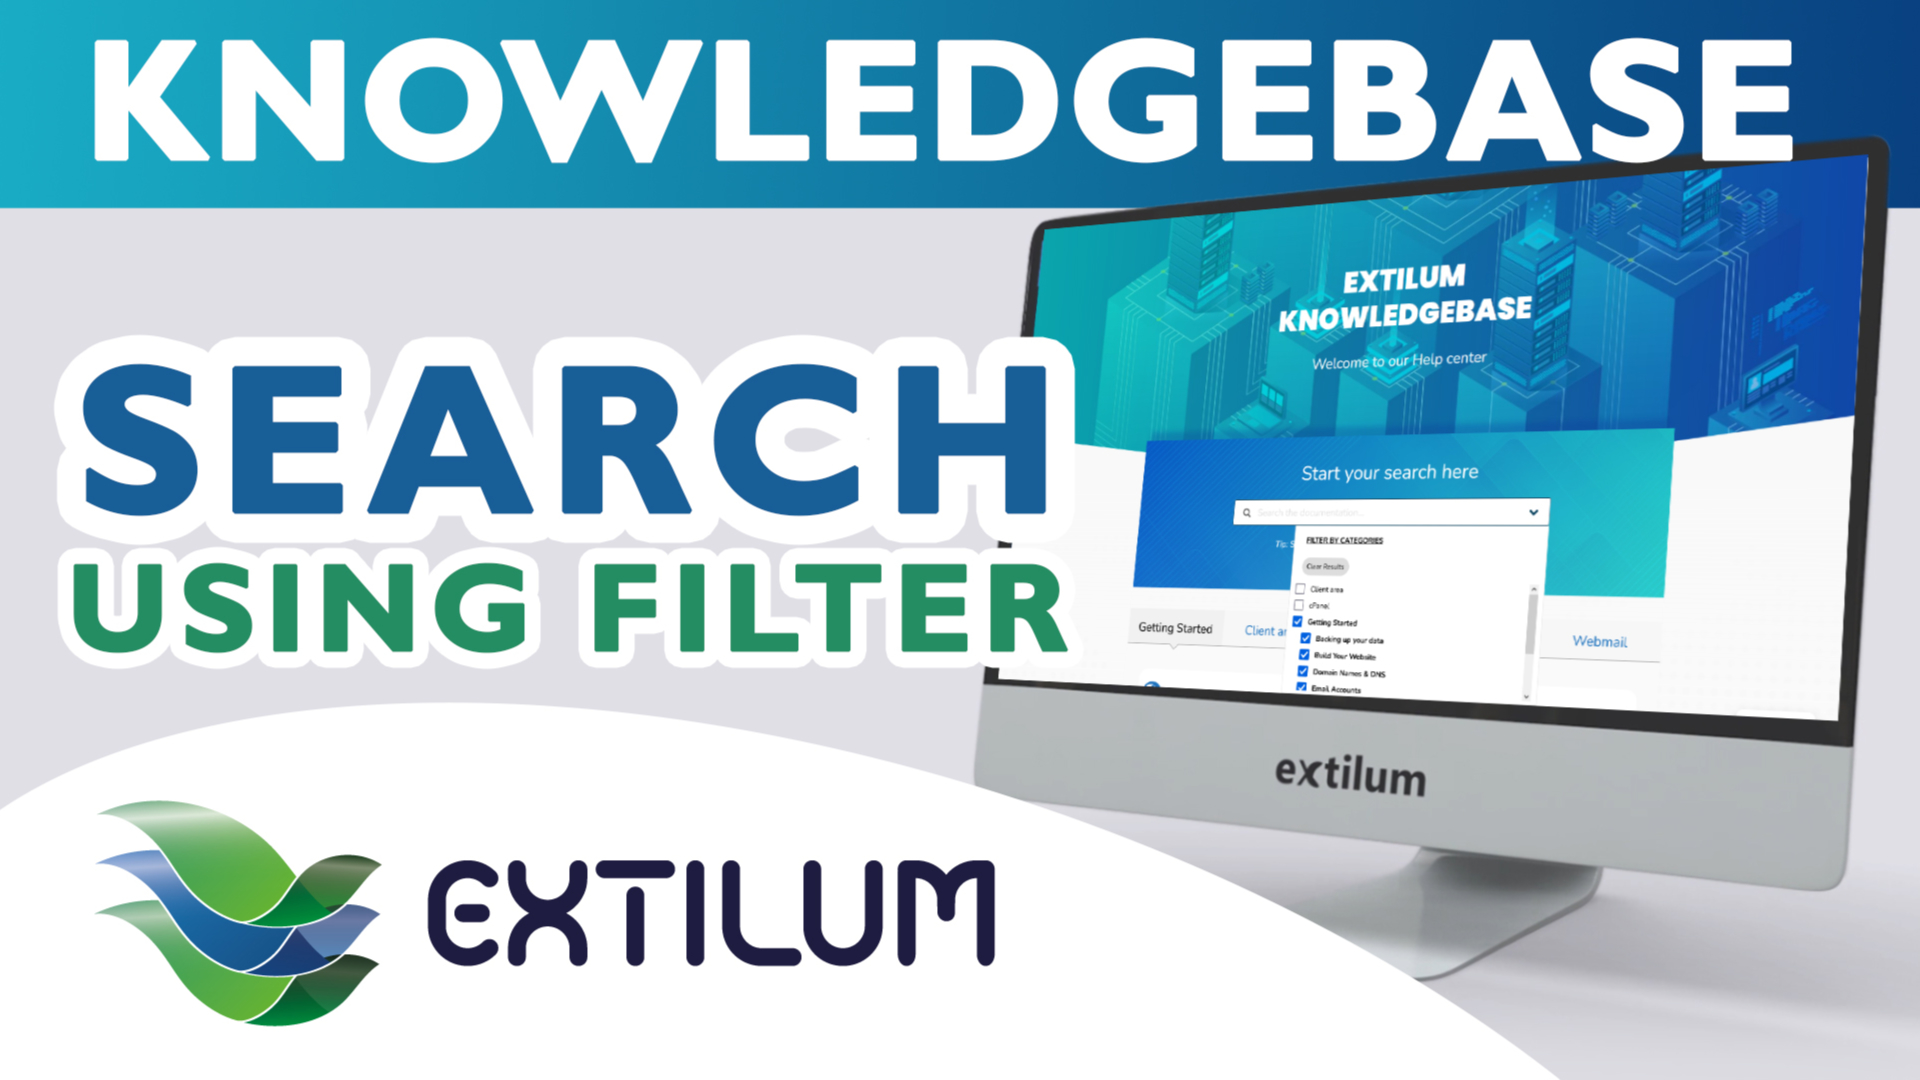 Extilum Knowledge Base - Search Using Filter by Categories